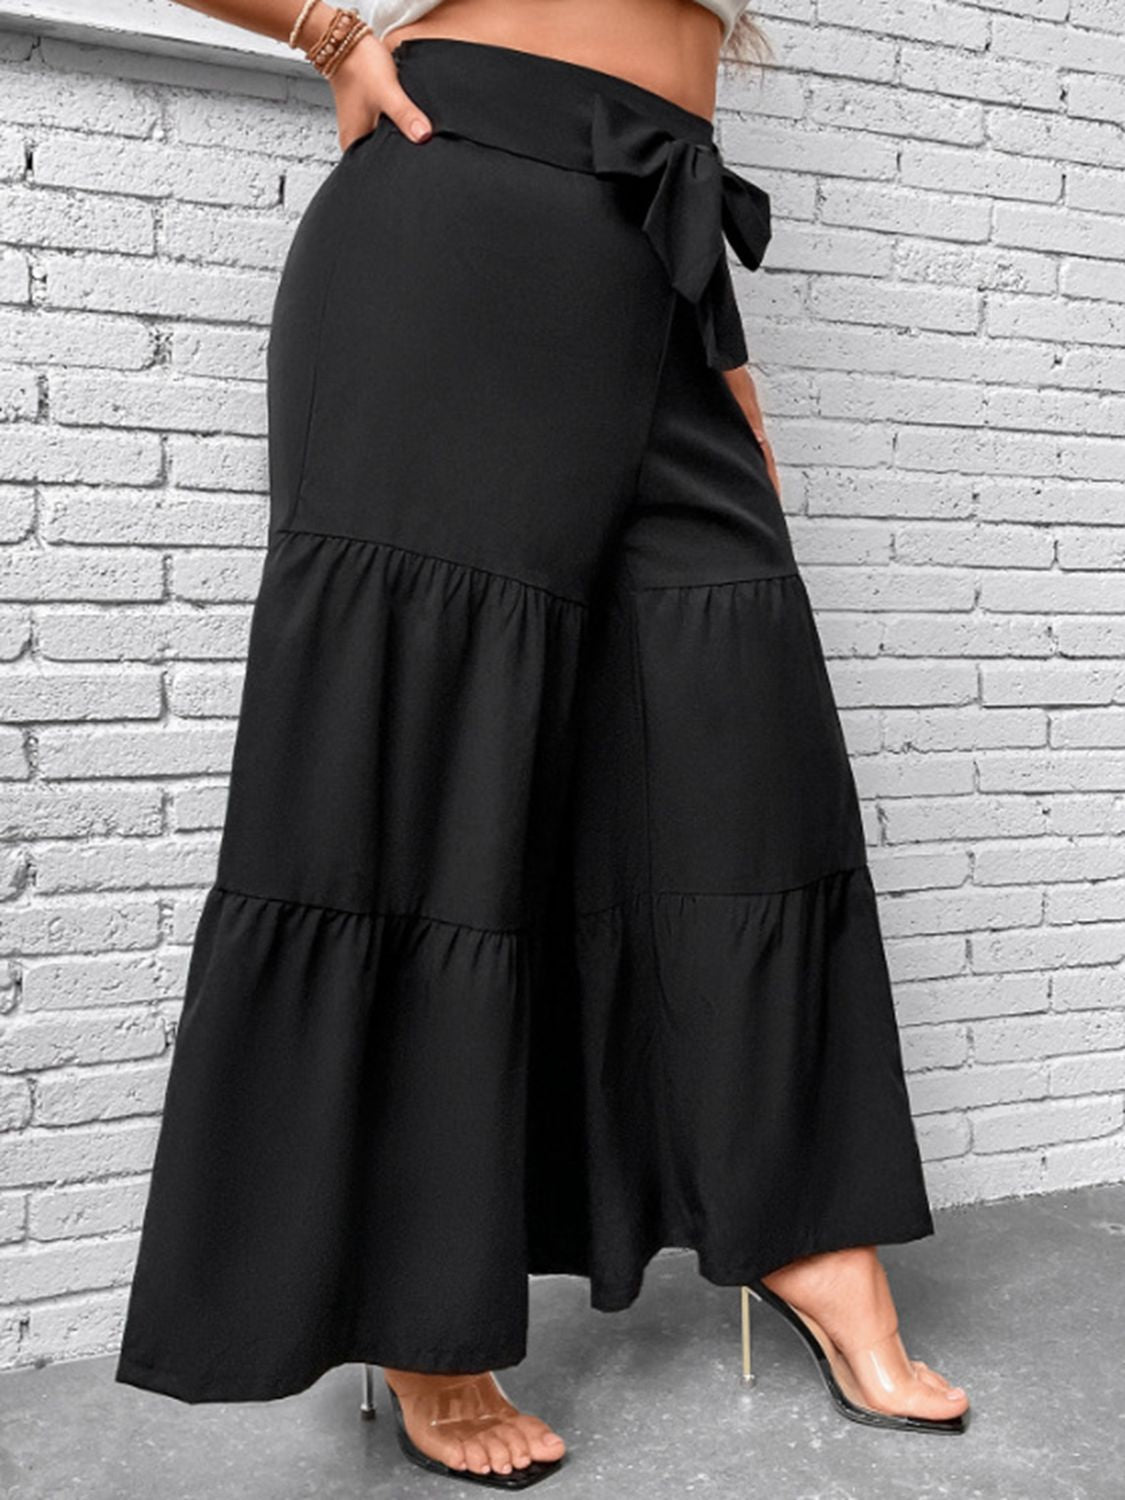 Plus Size Tiered Wide Leg Pants - Everyday-Sales.com